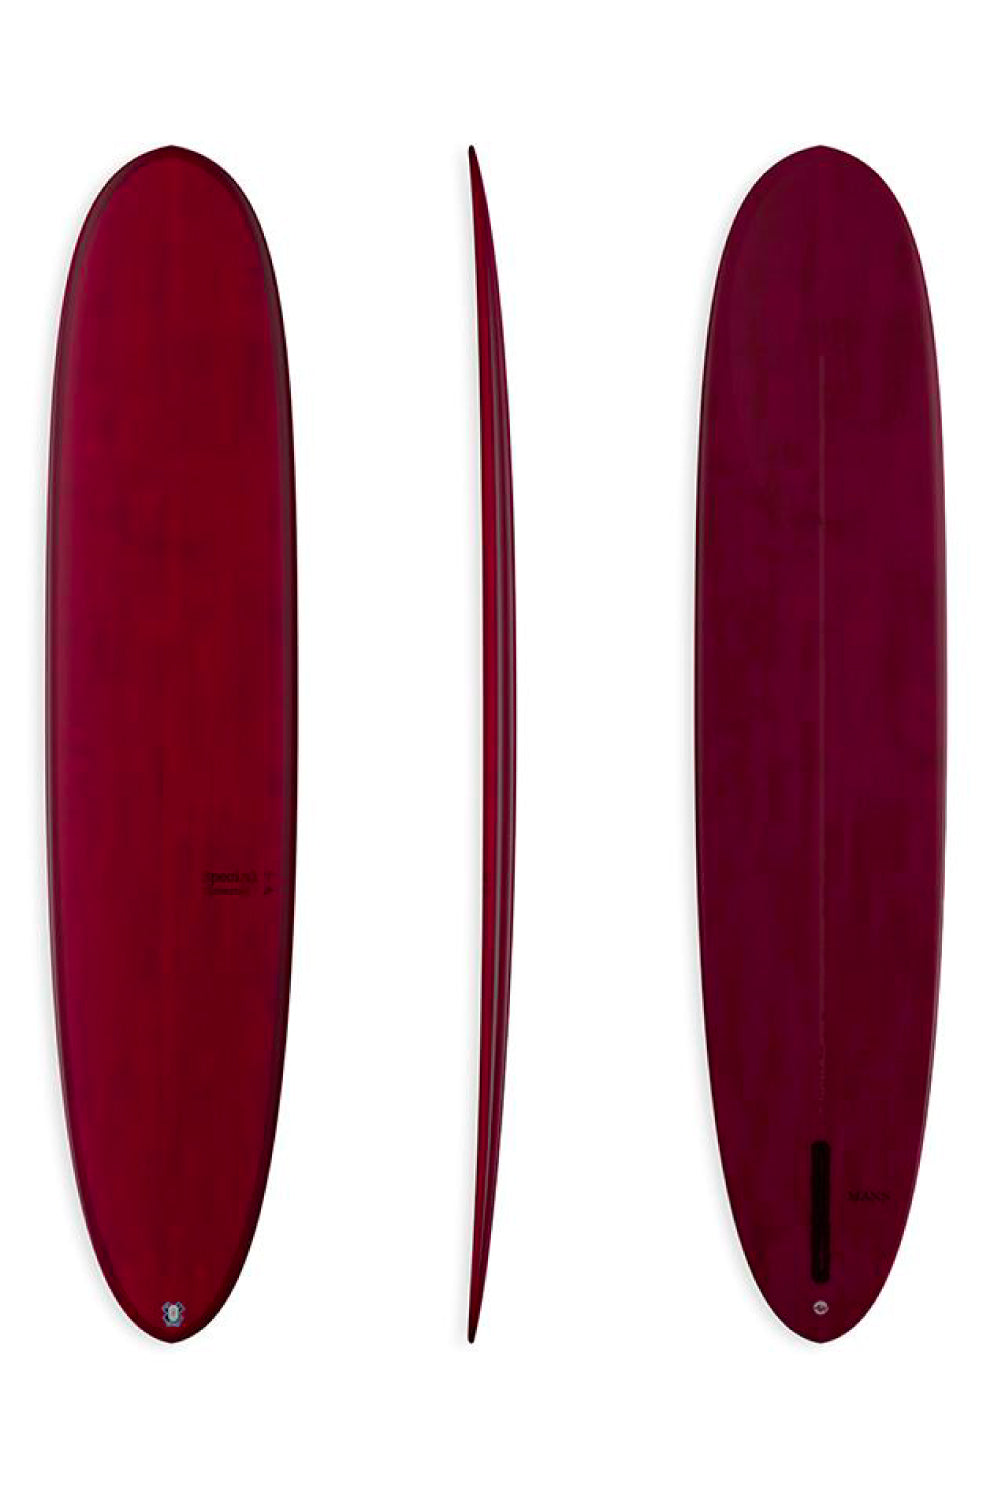 Firewire Special T Thunderbolt Red Longboard